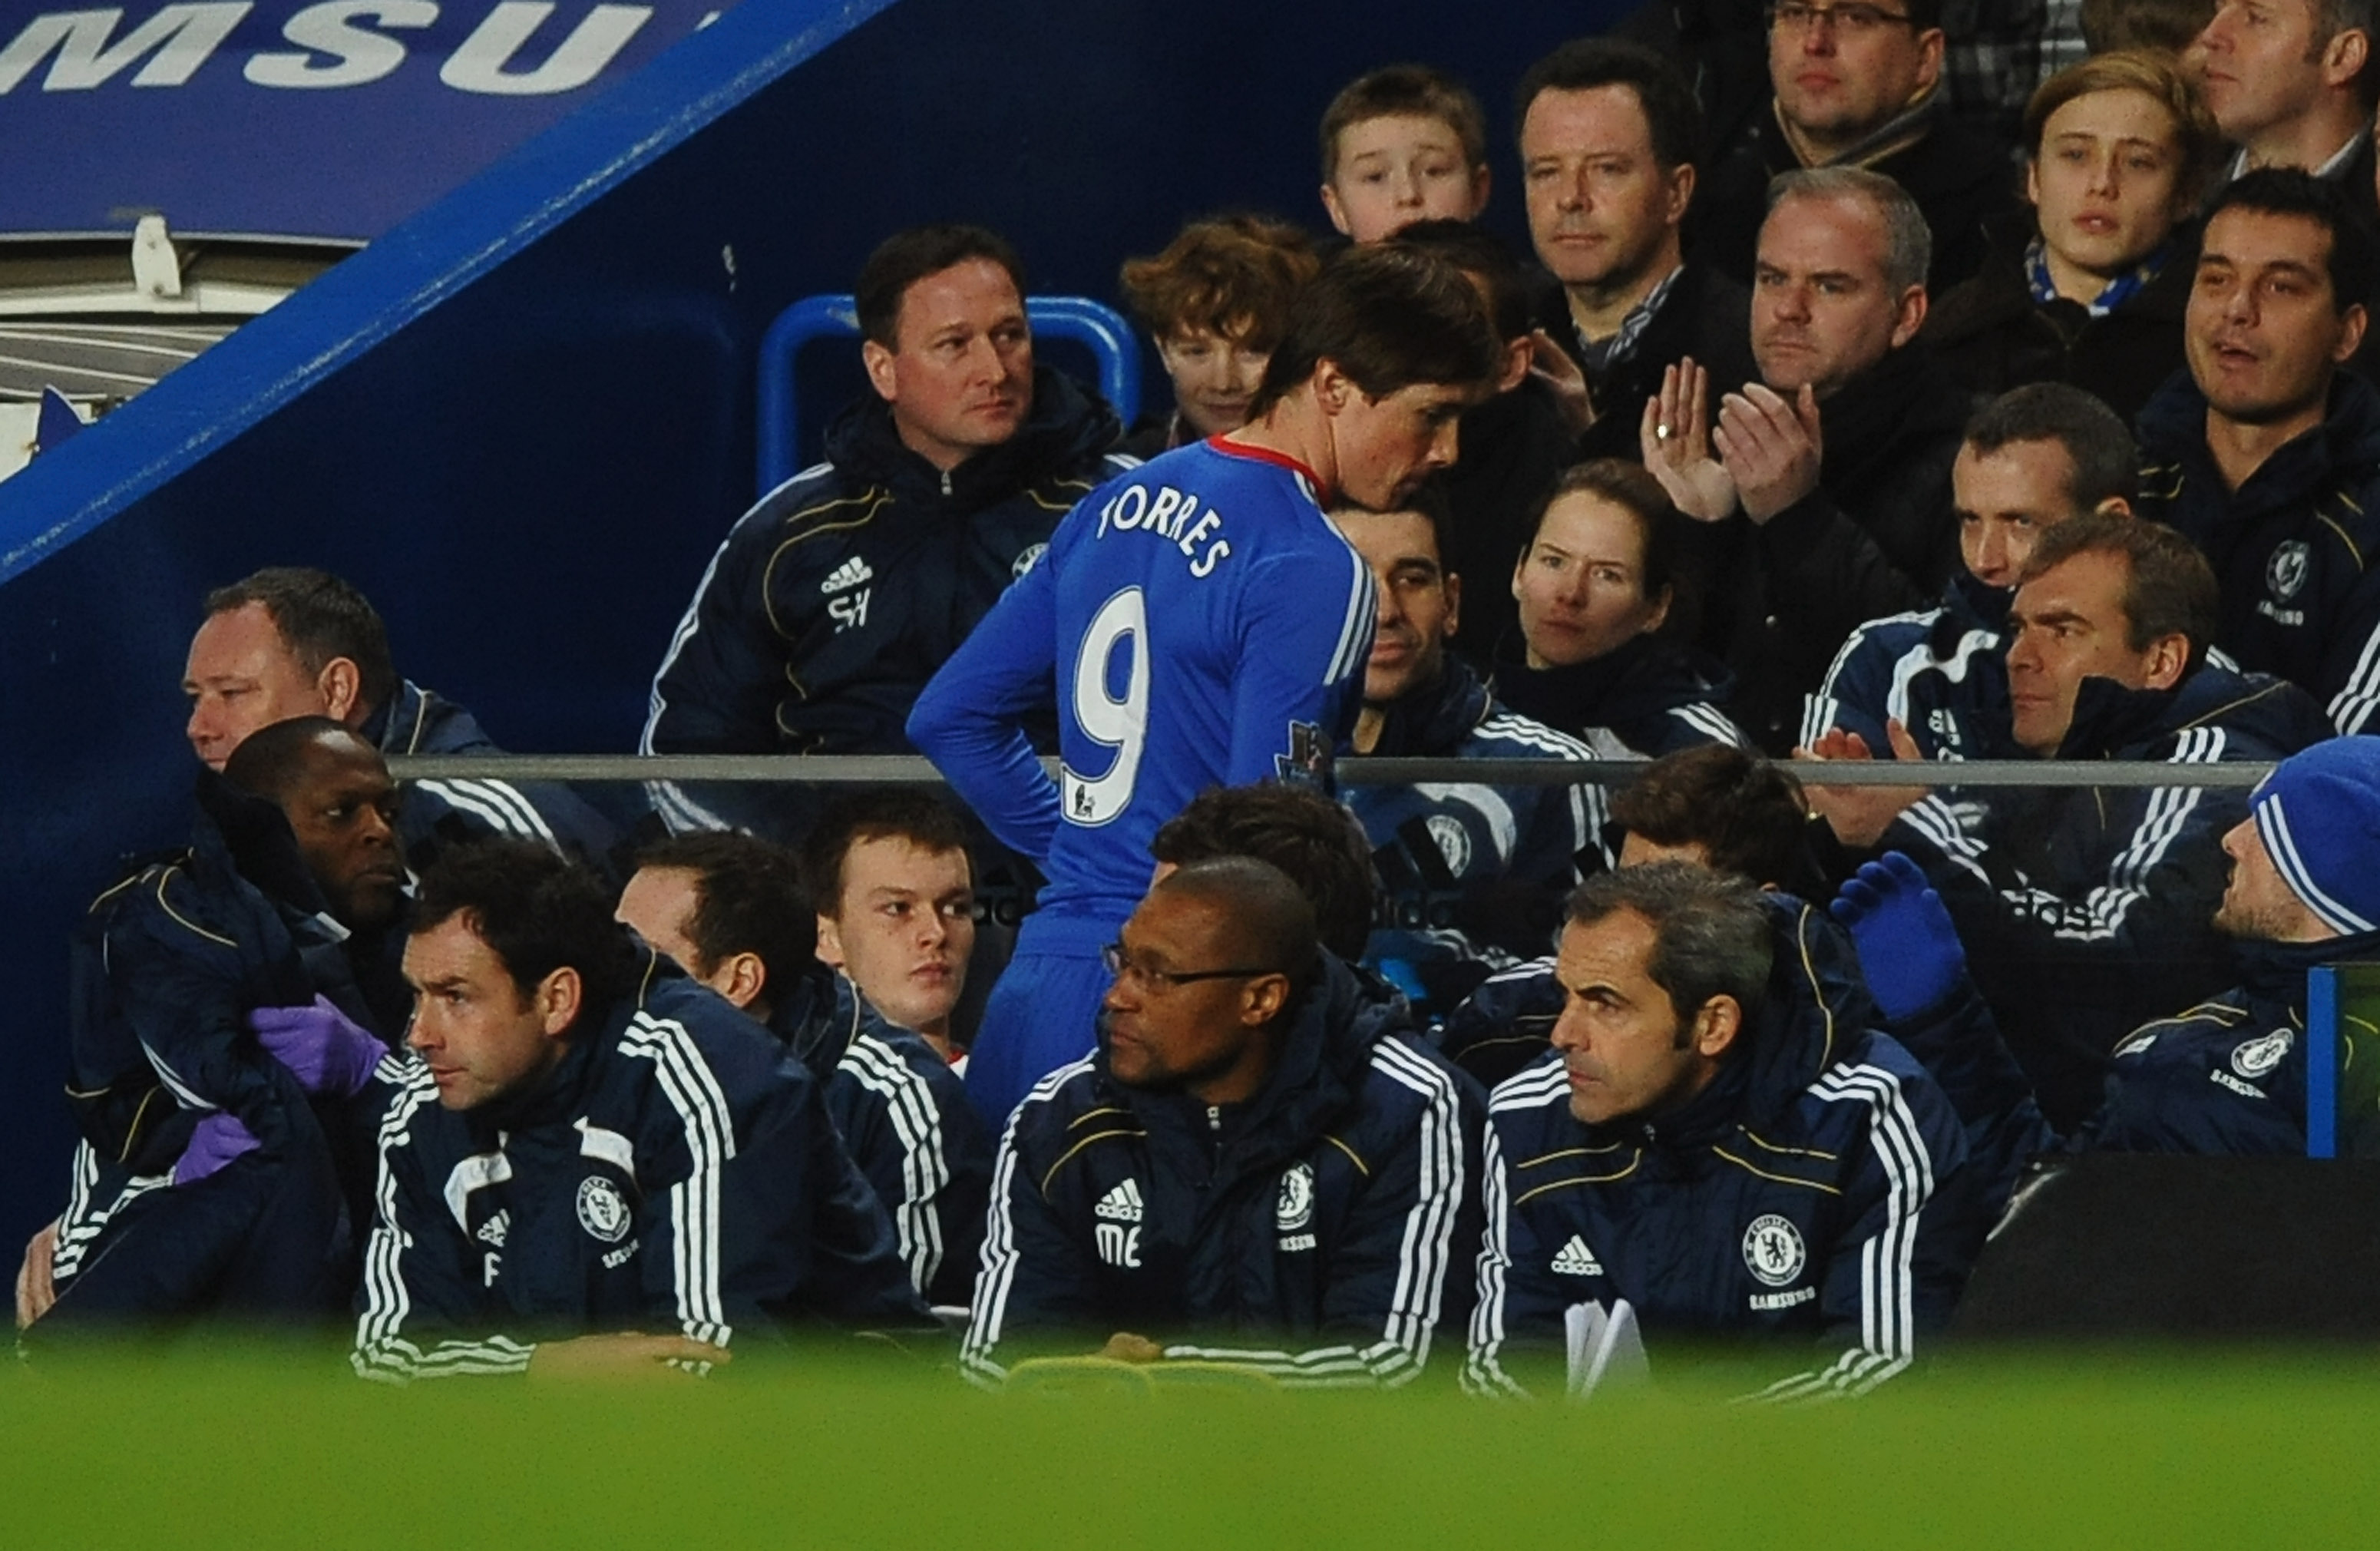 LONDON, ENGLAND - FEBRUARY 06:  Fernando Torres of Chelsea takes a seat on the bench as he is substituted during the Barclays Premier League match between Chelsea and Liverpool at Stamford Bridge on February 6, 2011 in London, England.  (Photo by Laurence